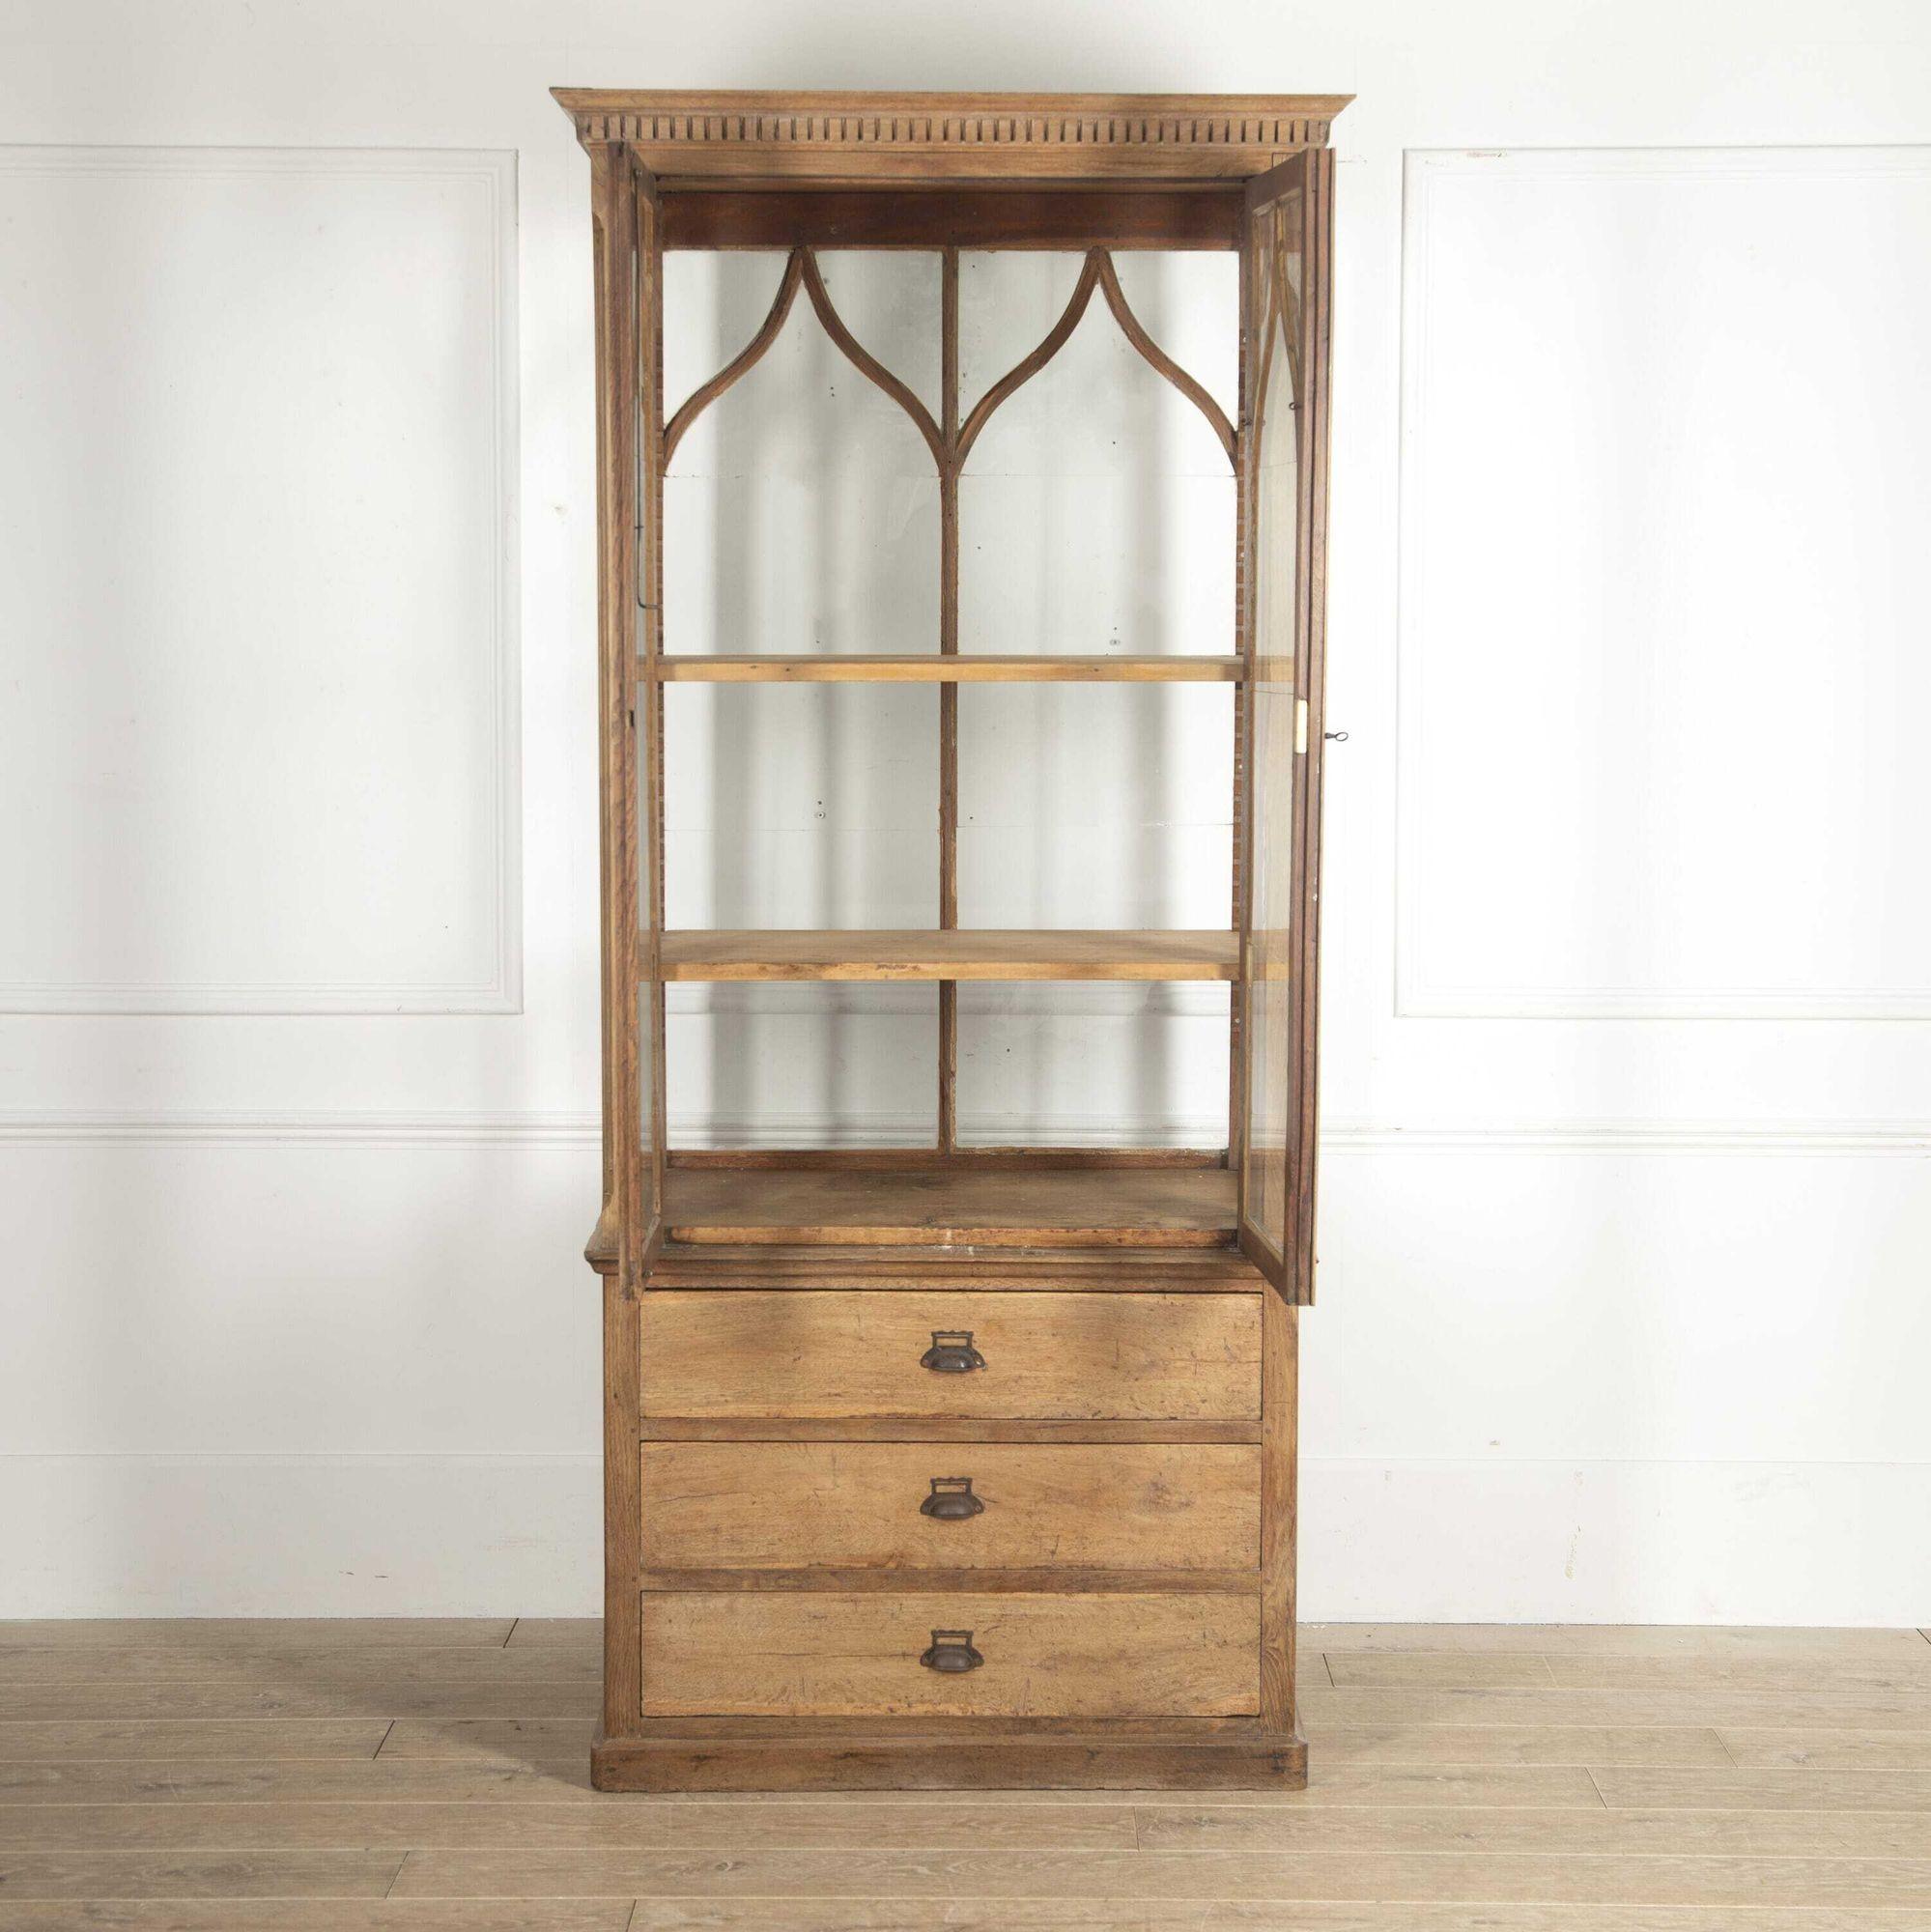 Pretty French 19th Century collectors cabinet.
This cabinet has elegant tall and slim proportions. The dentil moulded cornice sits above glazed doors with attractive arched panels which enclose shelving.
Below, the oak base offers three long